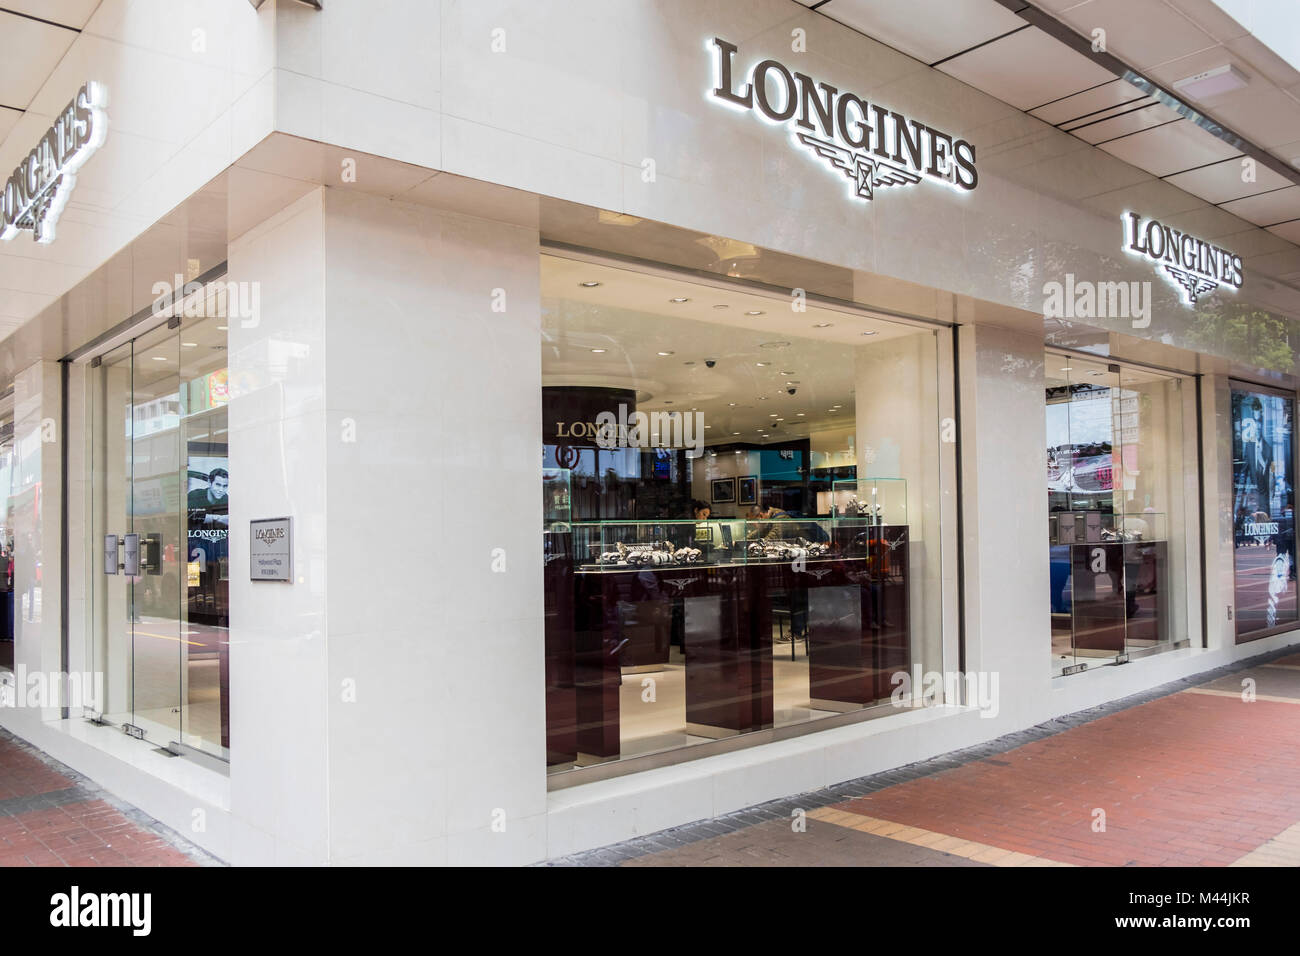 HONG KONG - FEBRUARY 4, 2018: Longines shop in Hong Kong. Longines is part of the Swatch Group. Longines was founded in 1832. Stock Photo